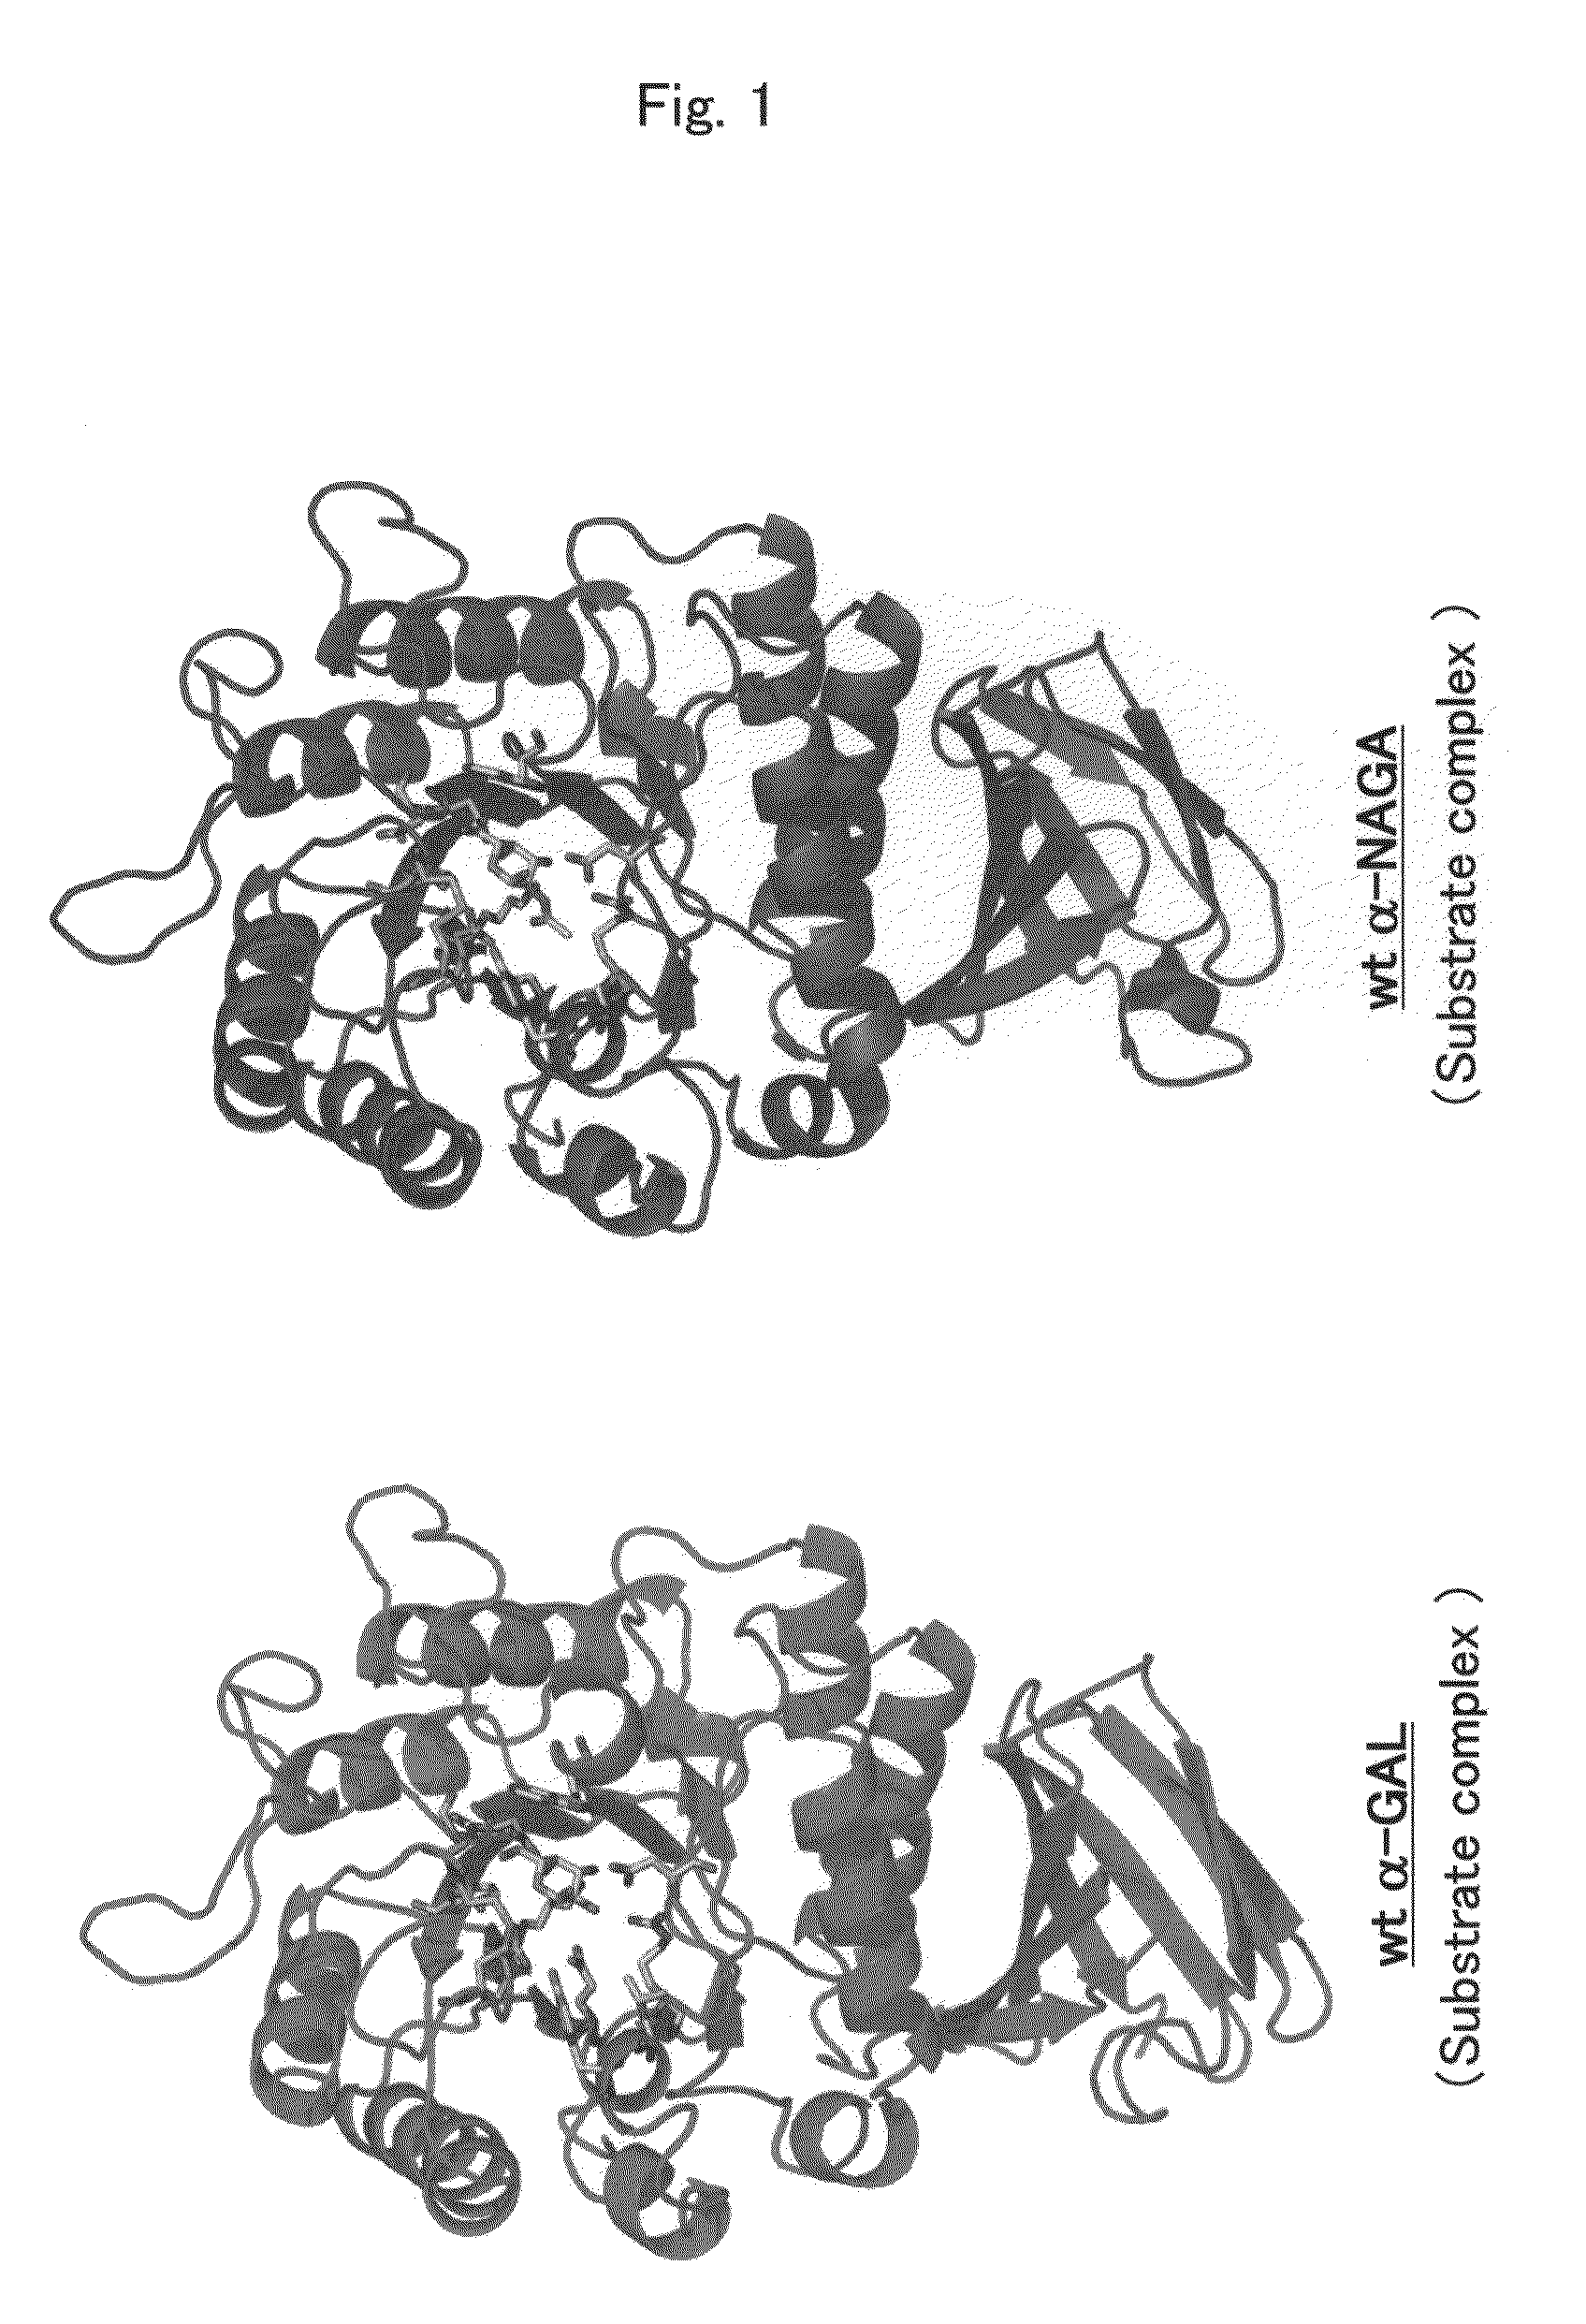 Pharmaceutical composition for enzyme replacement therapy